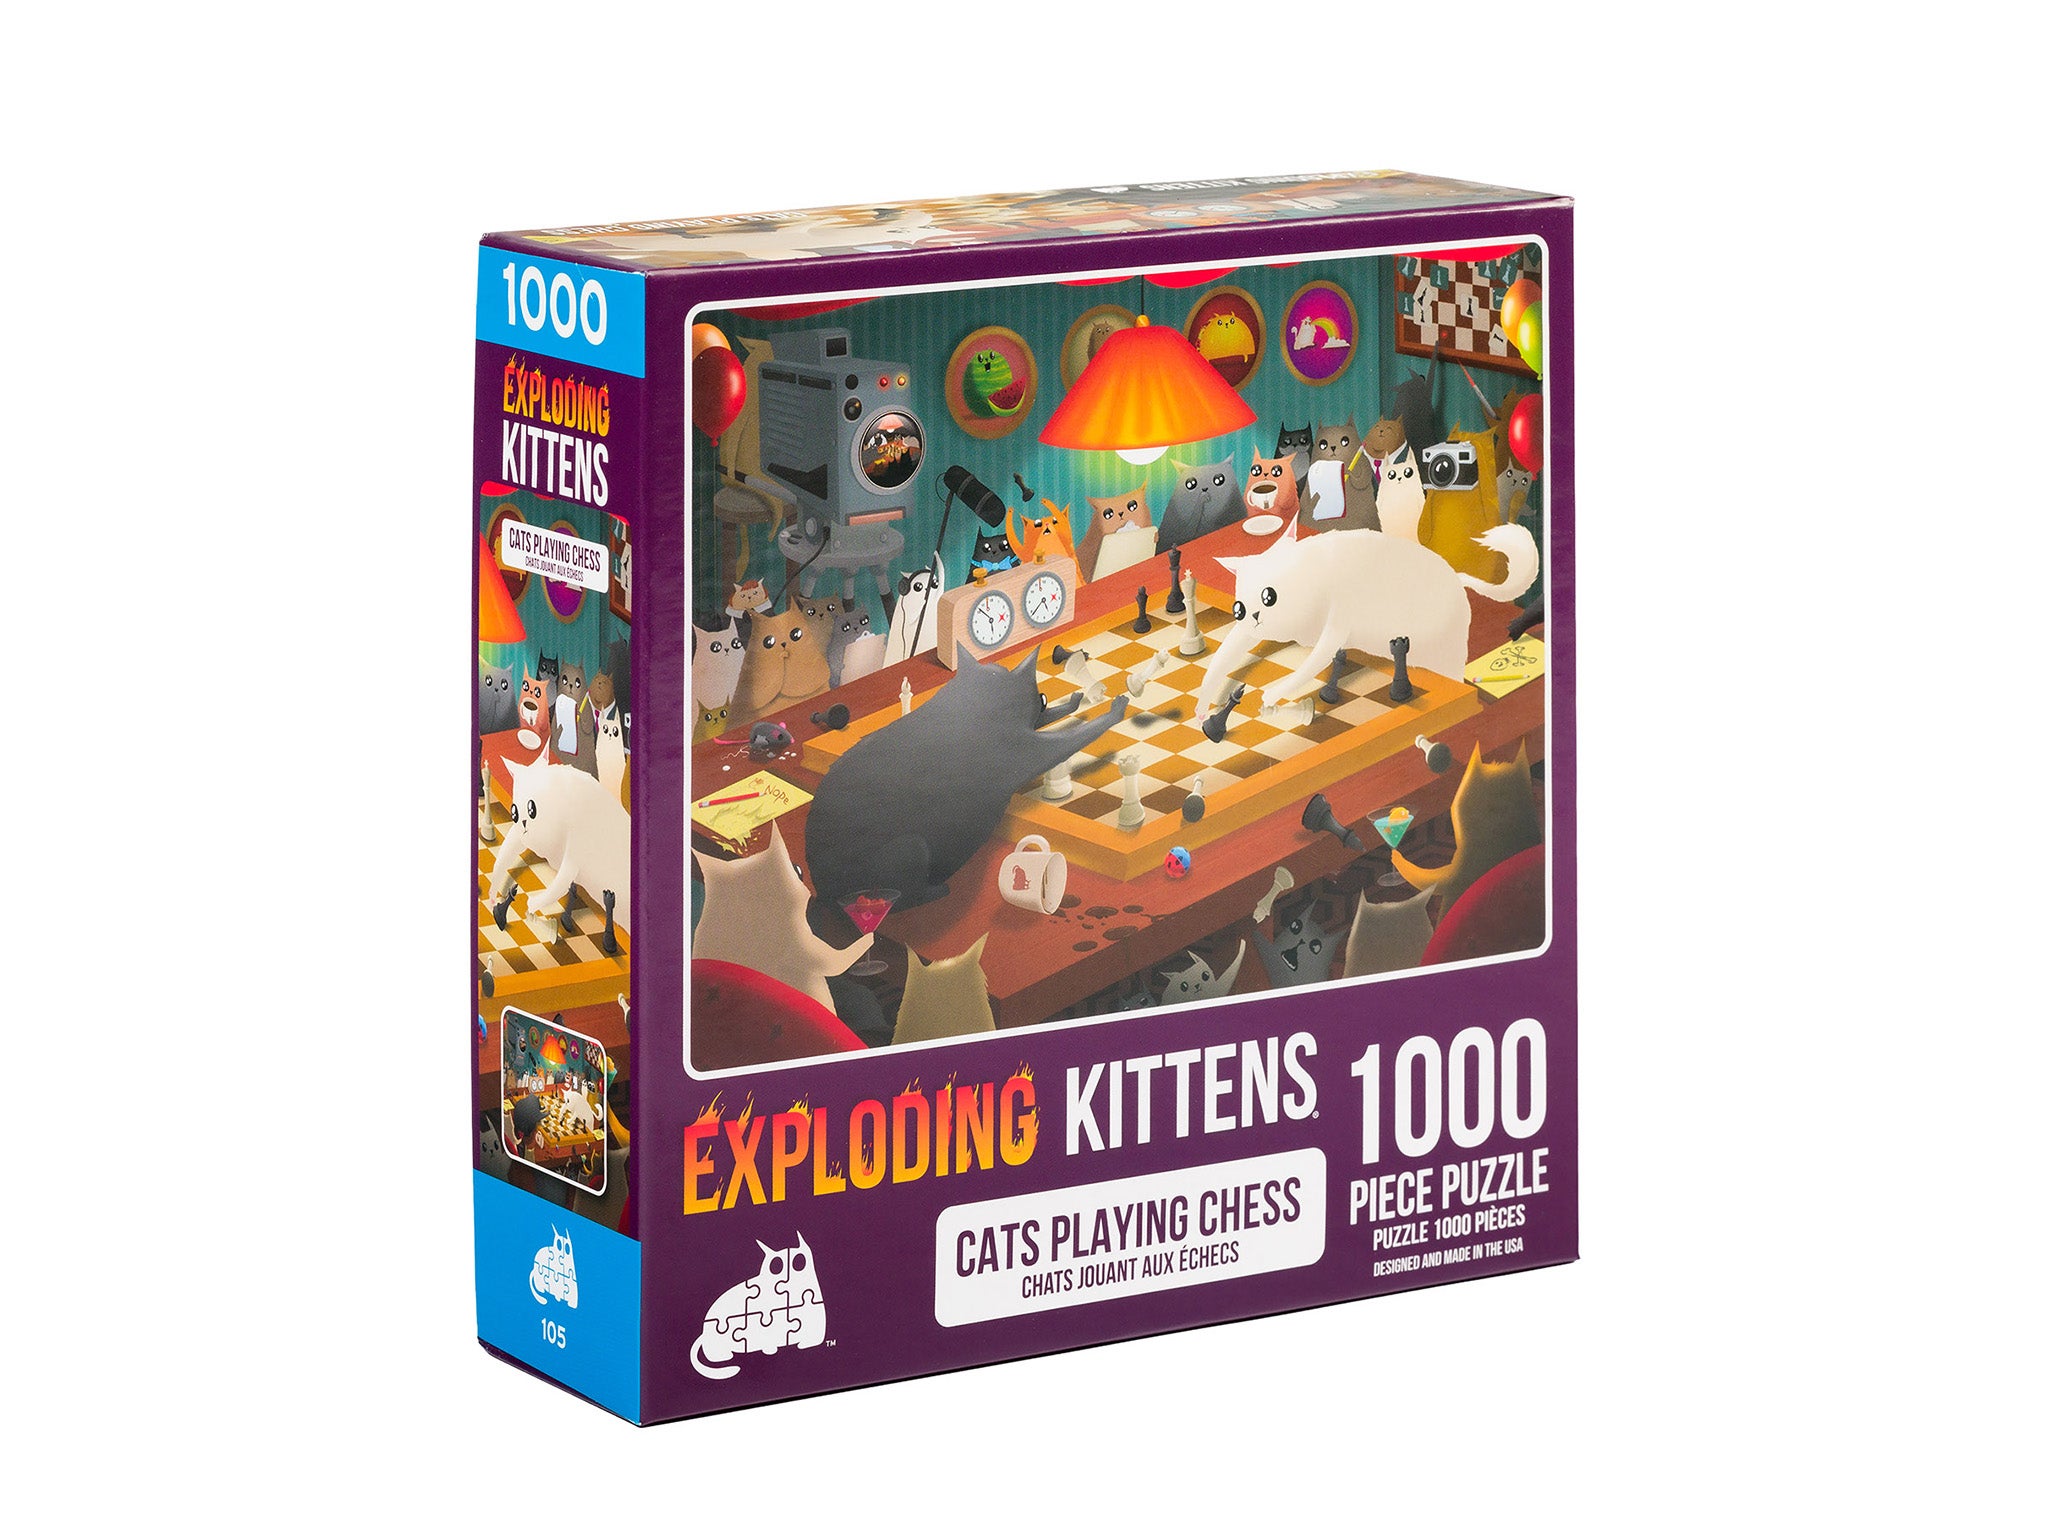 Exploding Kittens’ cats playing chess, 1000 pcs indybest.jpg